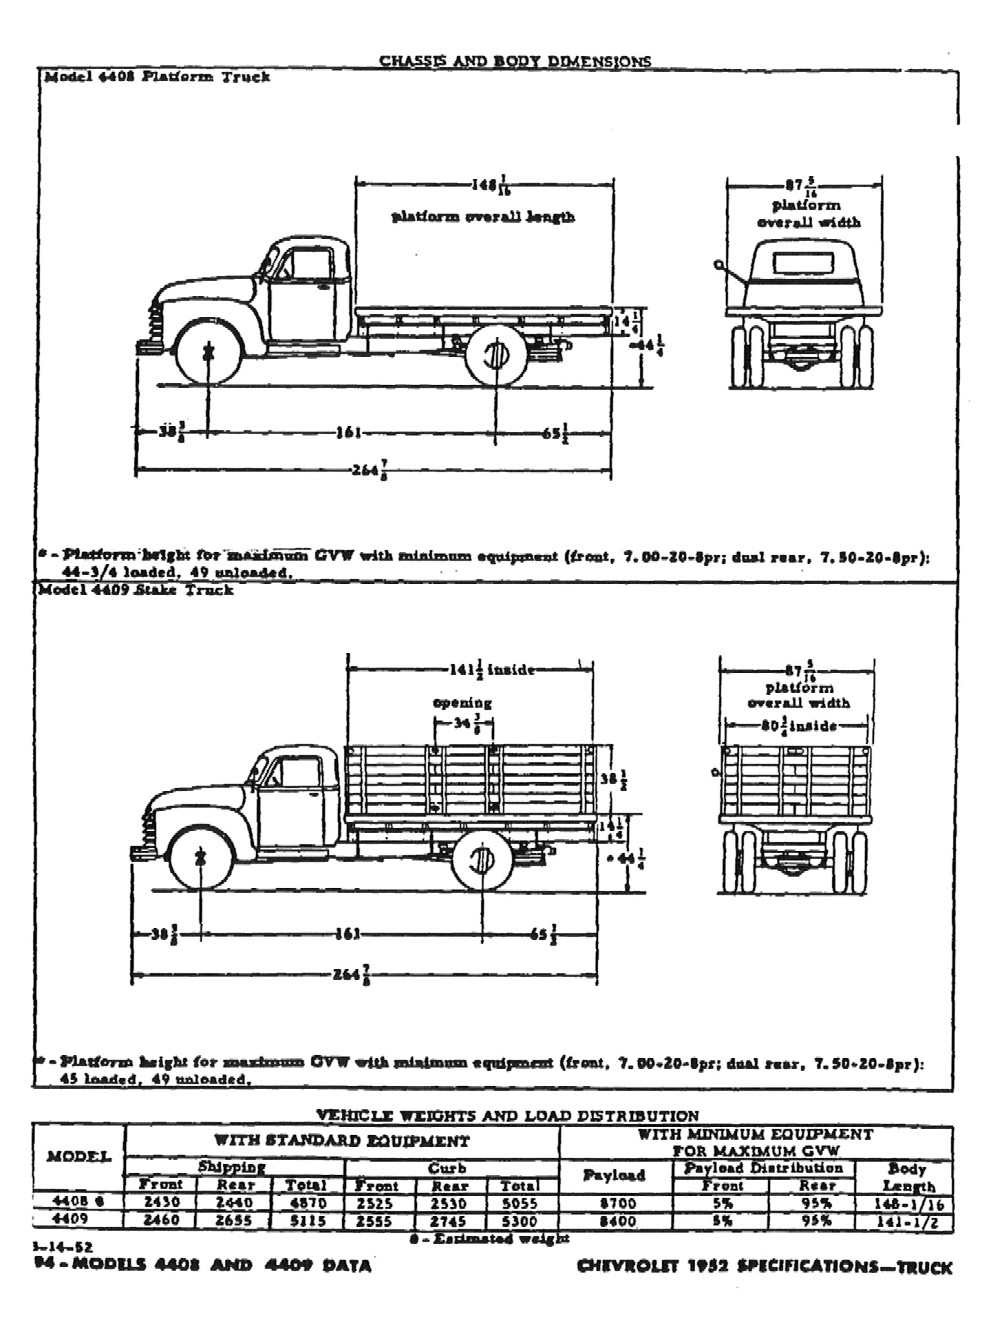 1952 Chevrolet Specifications Pack